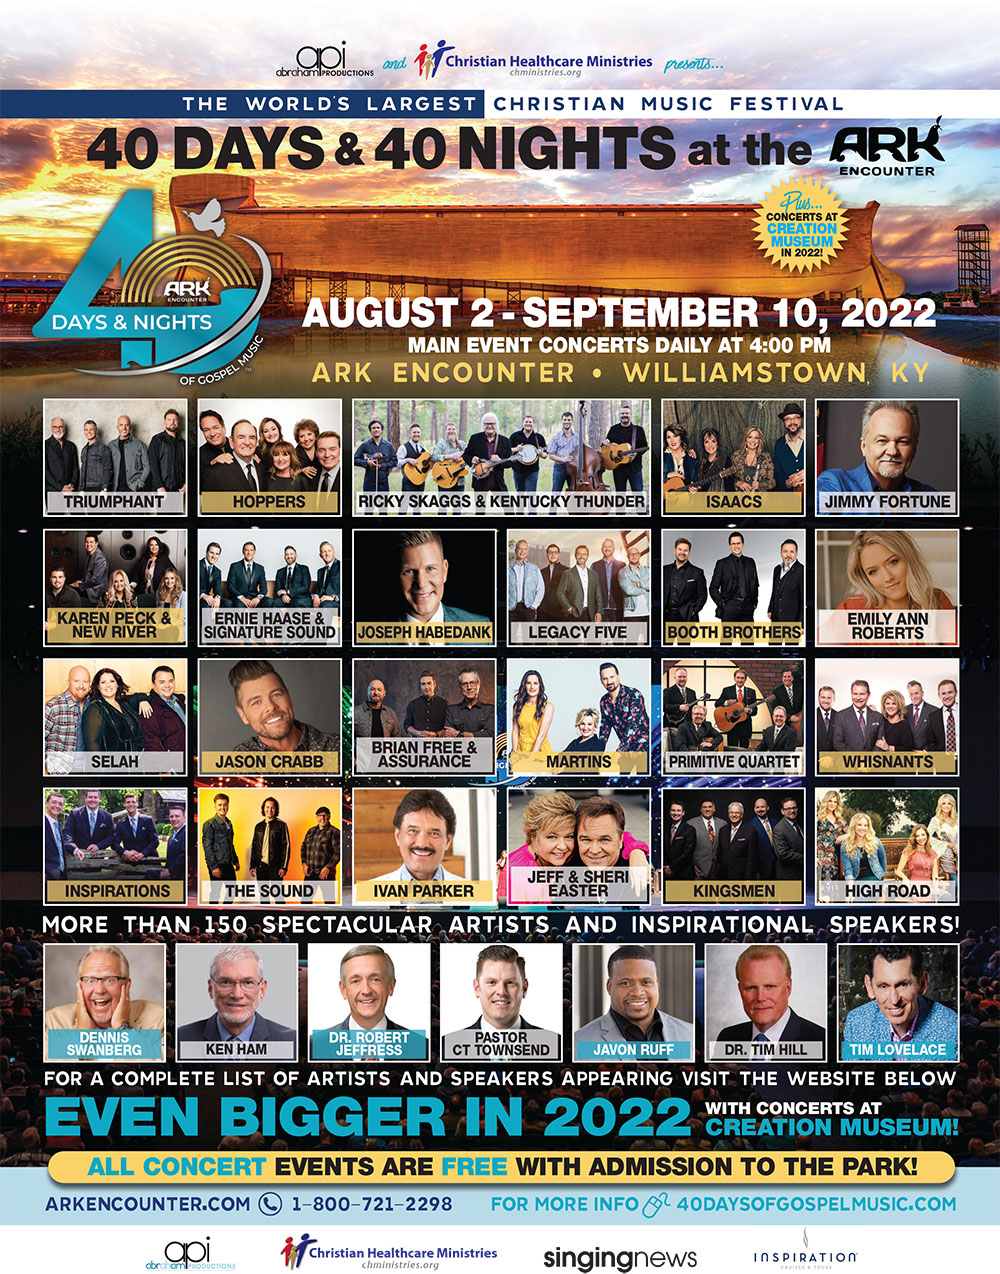 40 Days and 40 Nights of Gospel Music Schedule